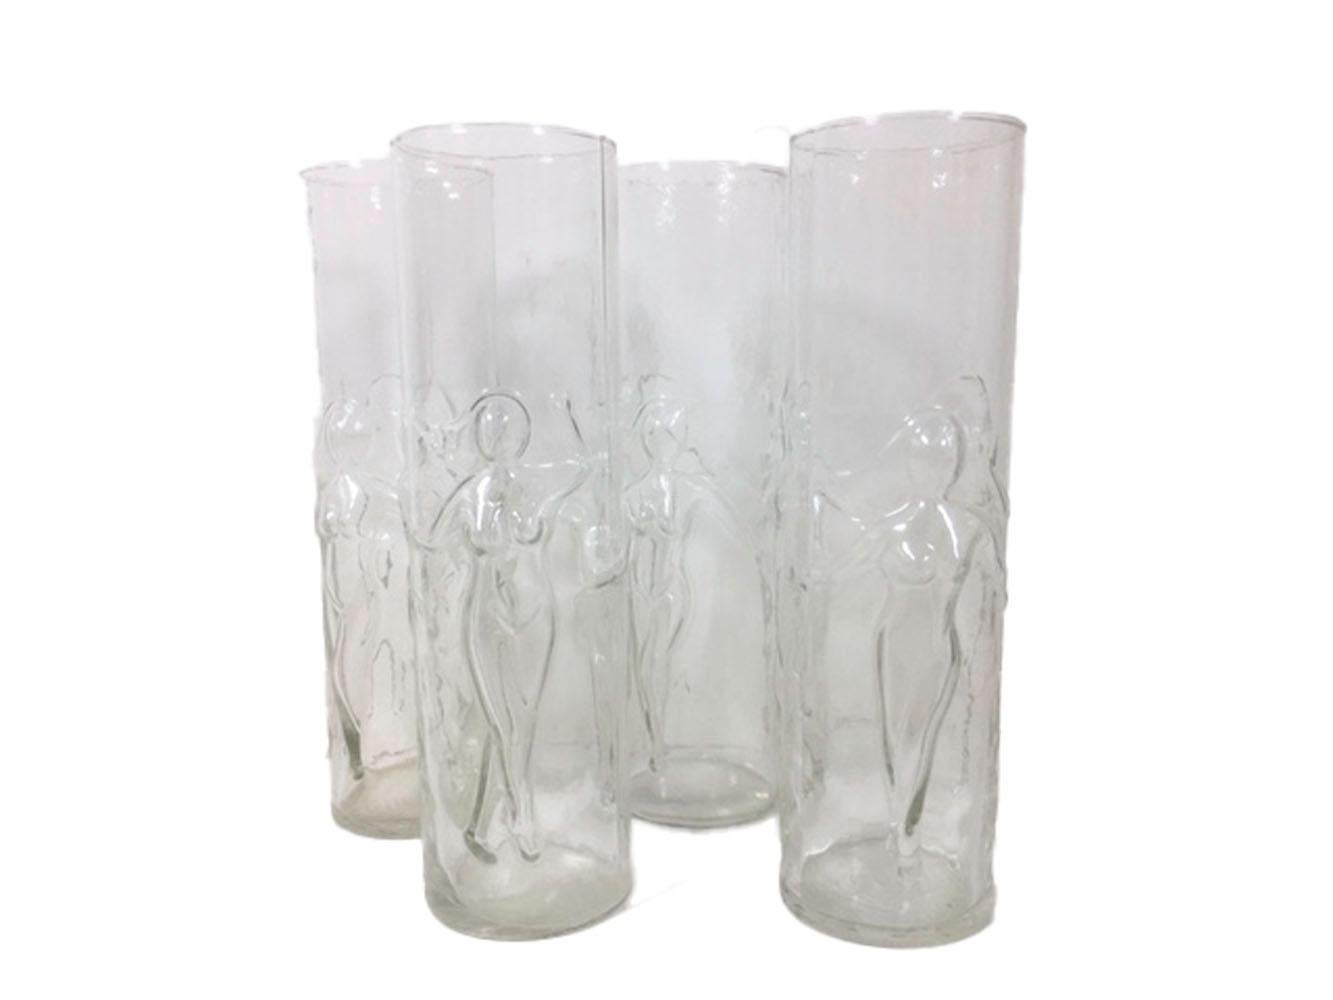 Mid 20th century set of 8 Libbey Tom Collins or Zombie glasses, of large size, in the Le Femme pattern. Each glass is molded in three panels, each with a raised image of a women in a different pose.